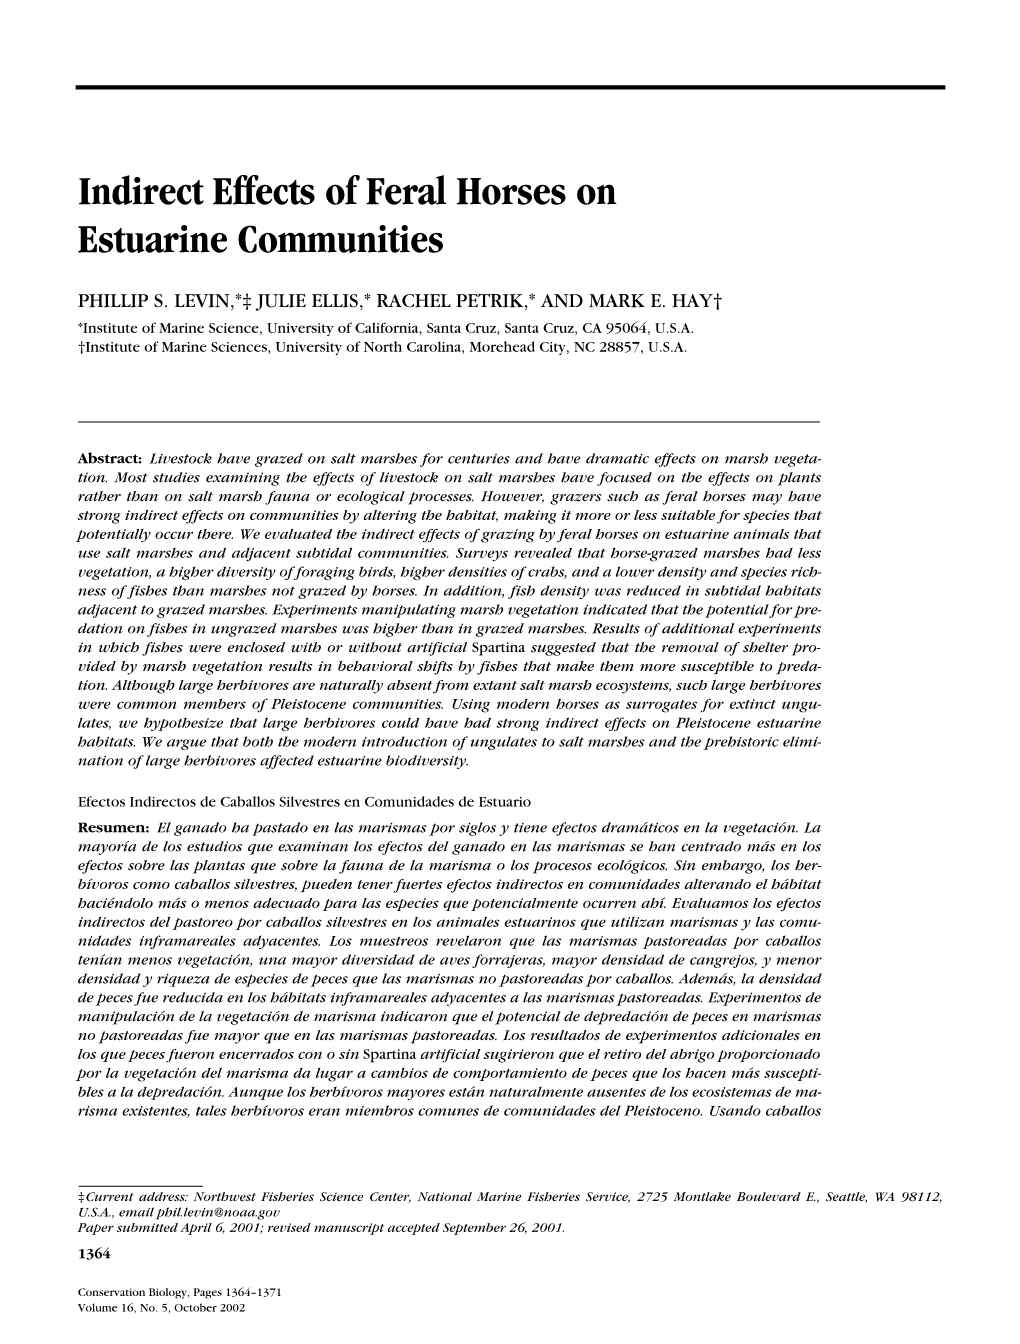 Indirect Effects of Feral Horses on Estuarine Communities